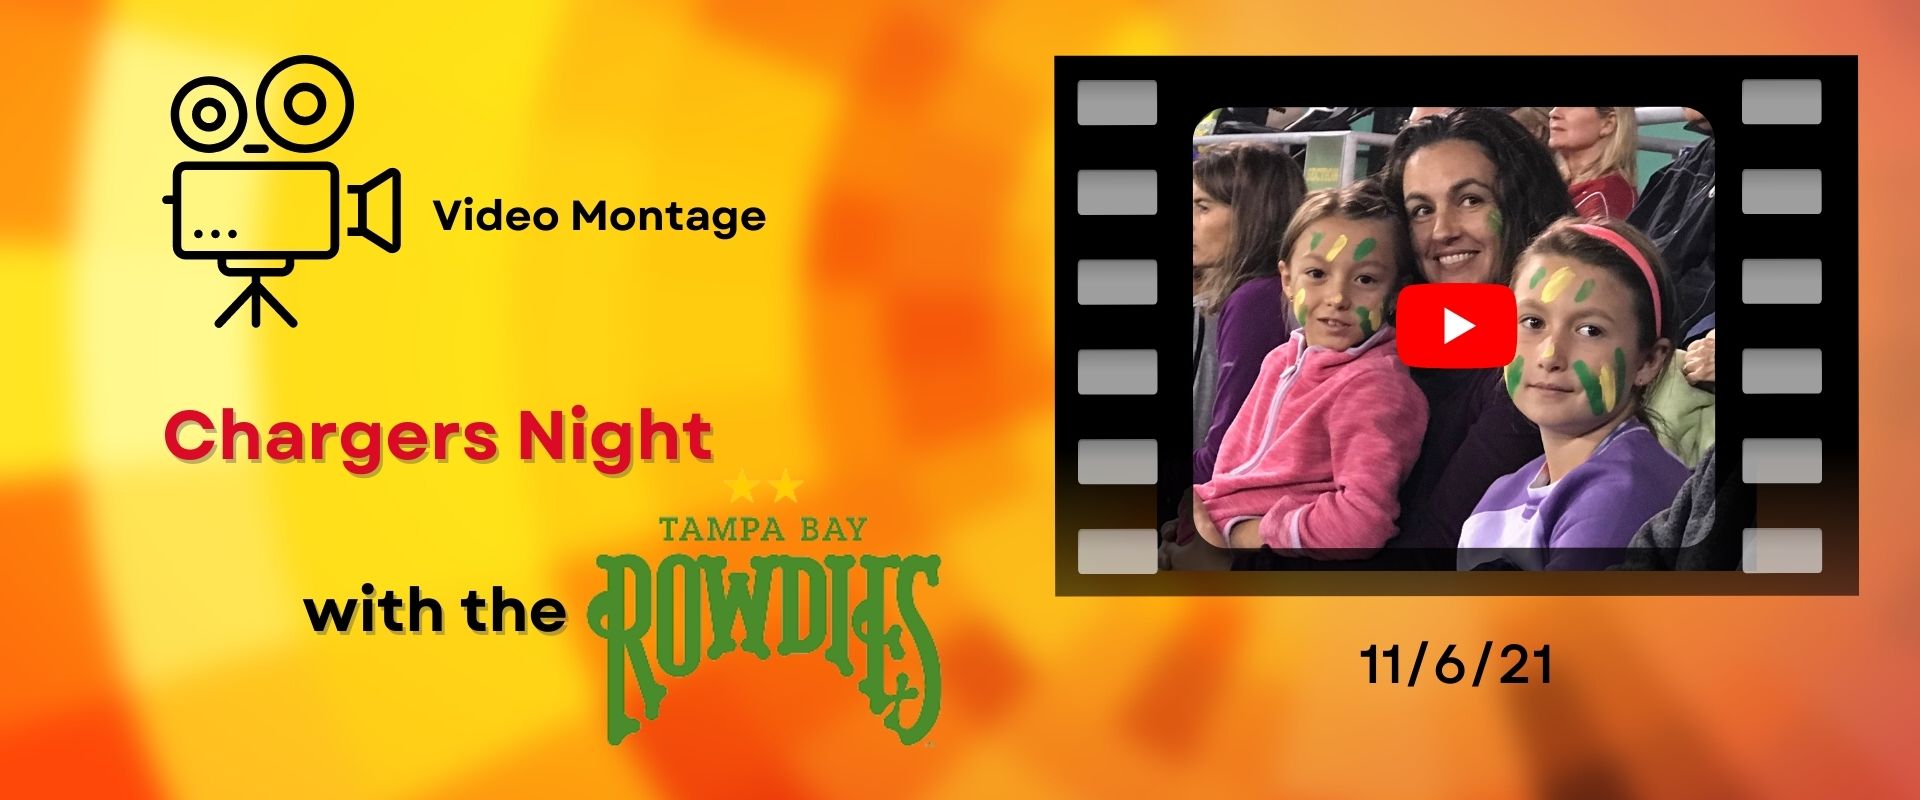 Chargers Night With The Rowdies 11/6/21